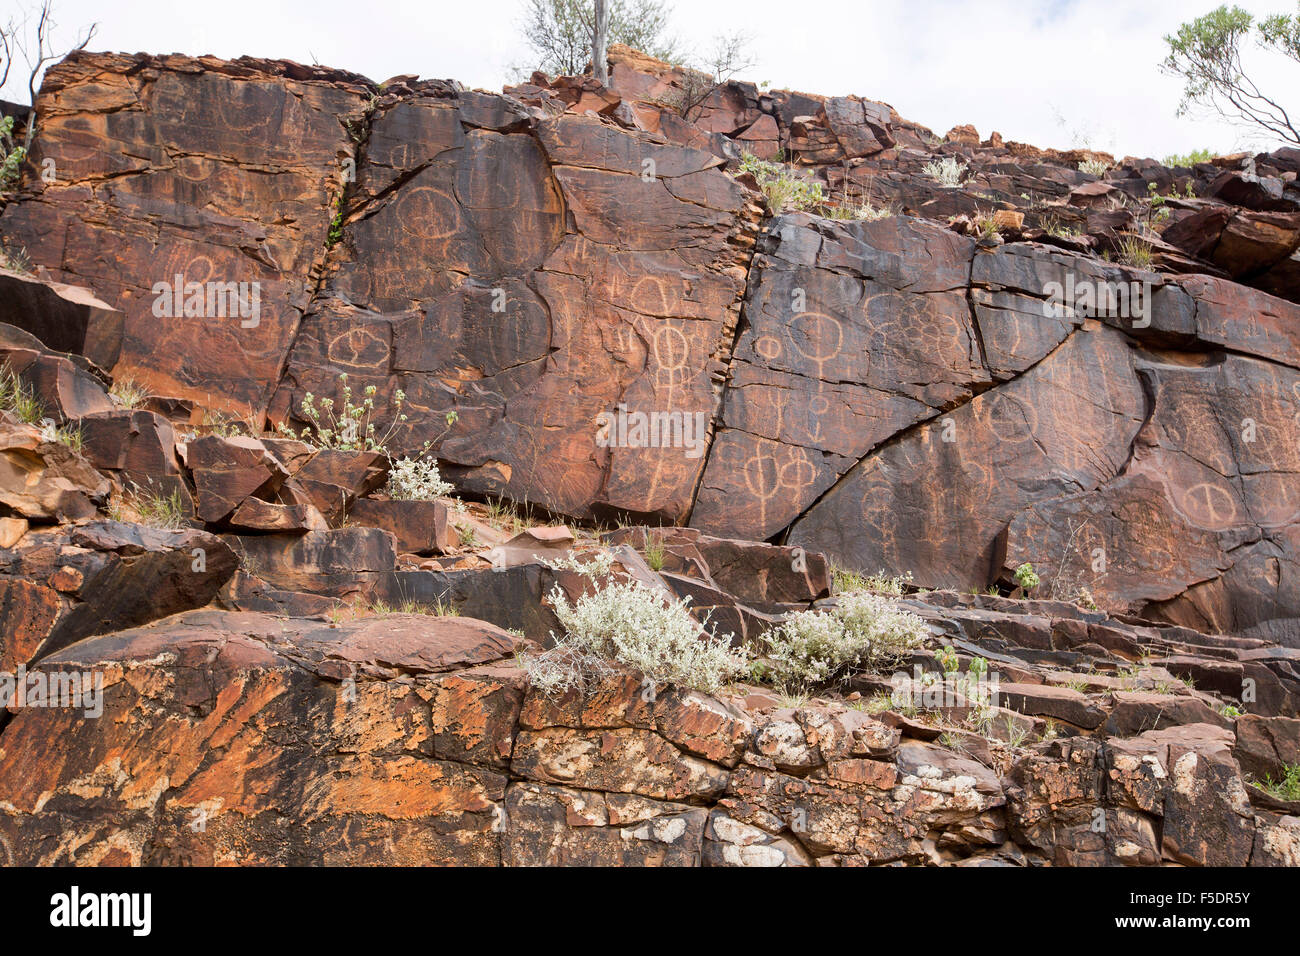 Ancient aboriginal rock art engravngs, symbols of initiation rites, on red stone walls in Flinders Ranges  in outback Australia Stock Photo